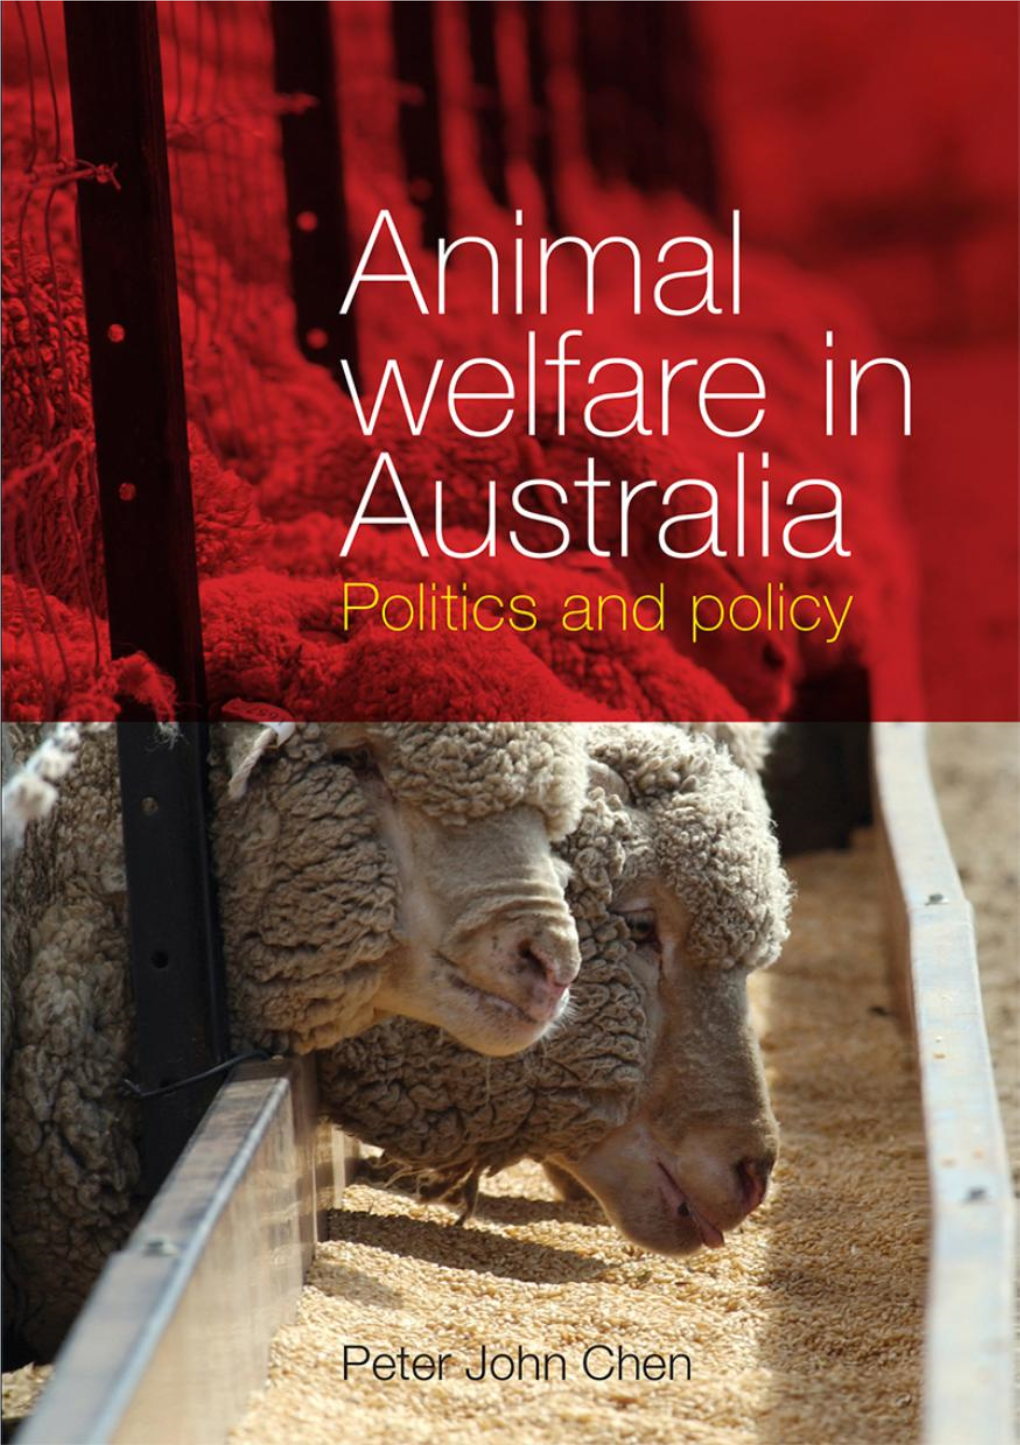 Animal Welfare in Australia: Politics and Policy, Published by Sydney University Press